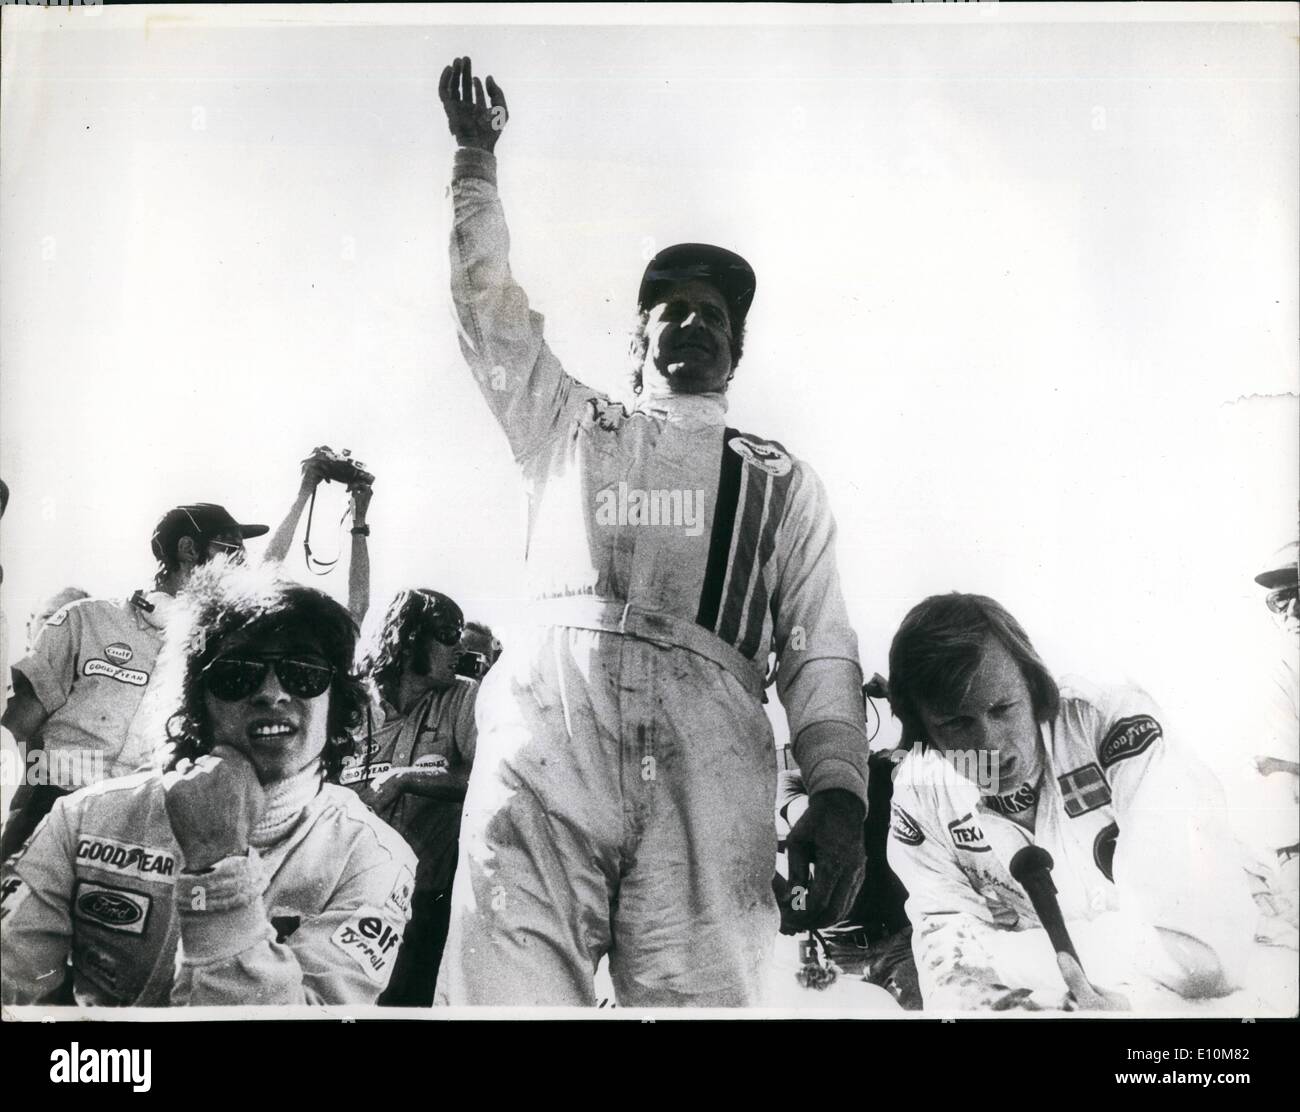 Jun. 06, 1973 - Denny Hume of New Zealand wins the Swedish Grand Prix. Denny Hume, the New Zealand racing driver driving a McLaren wont the Swedish Gran Prix in Anderstorp Sweden on Sunday. Photo Shows: After the race Denny Hume seen raising his hand after winning the Swedish Grand Prix. left is Francois Cevert, who was third, and right, Ronnie Peterson second. AM/Keystone Stock Photo